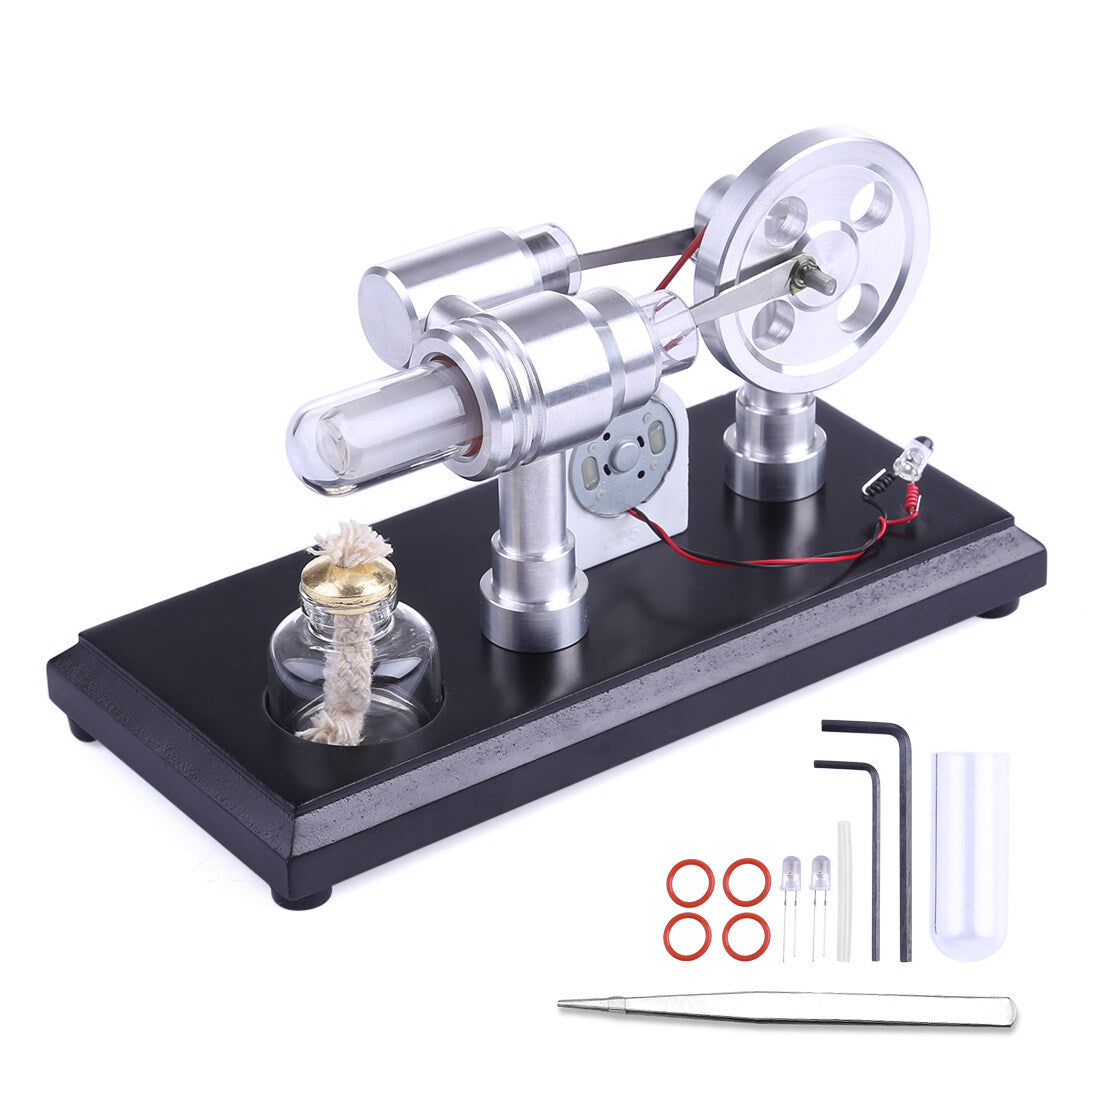 Double-Cylinder Stirling Engine Kit - Power Up Your Space with Stunning LED Lights enginediyshop